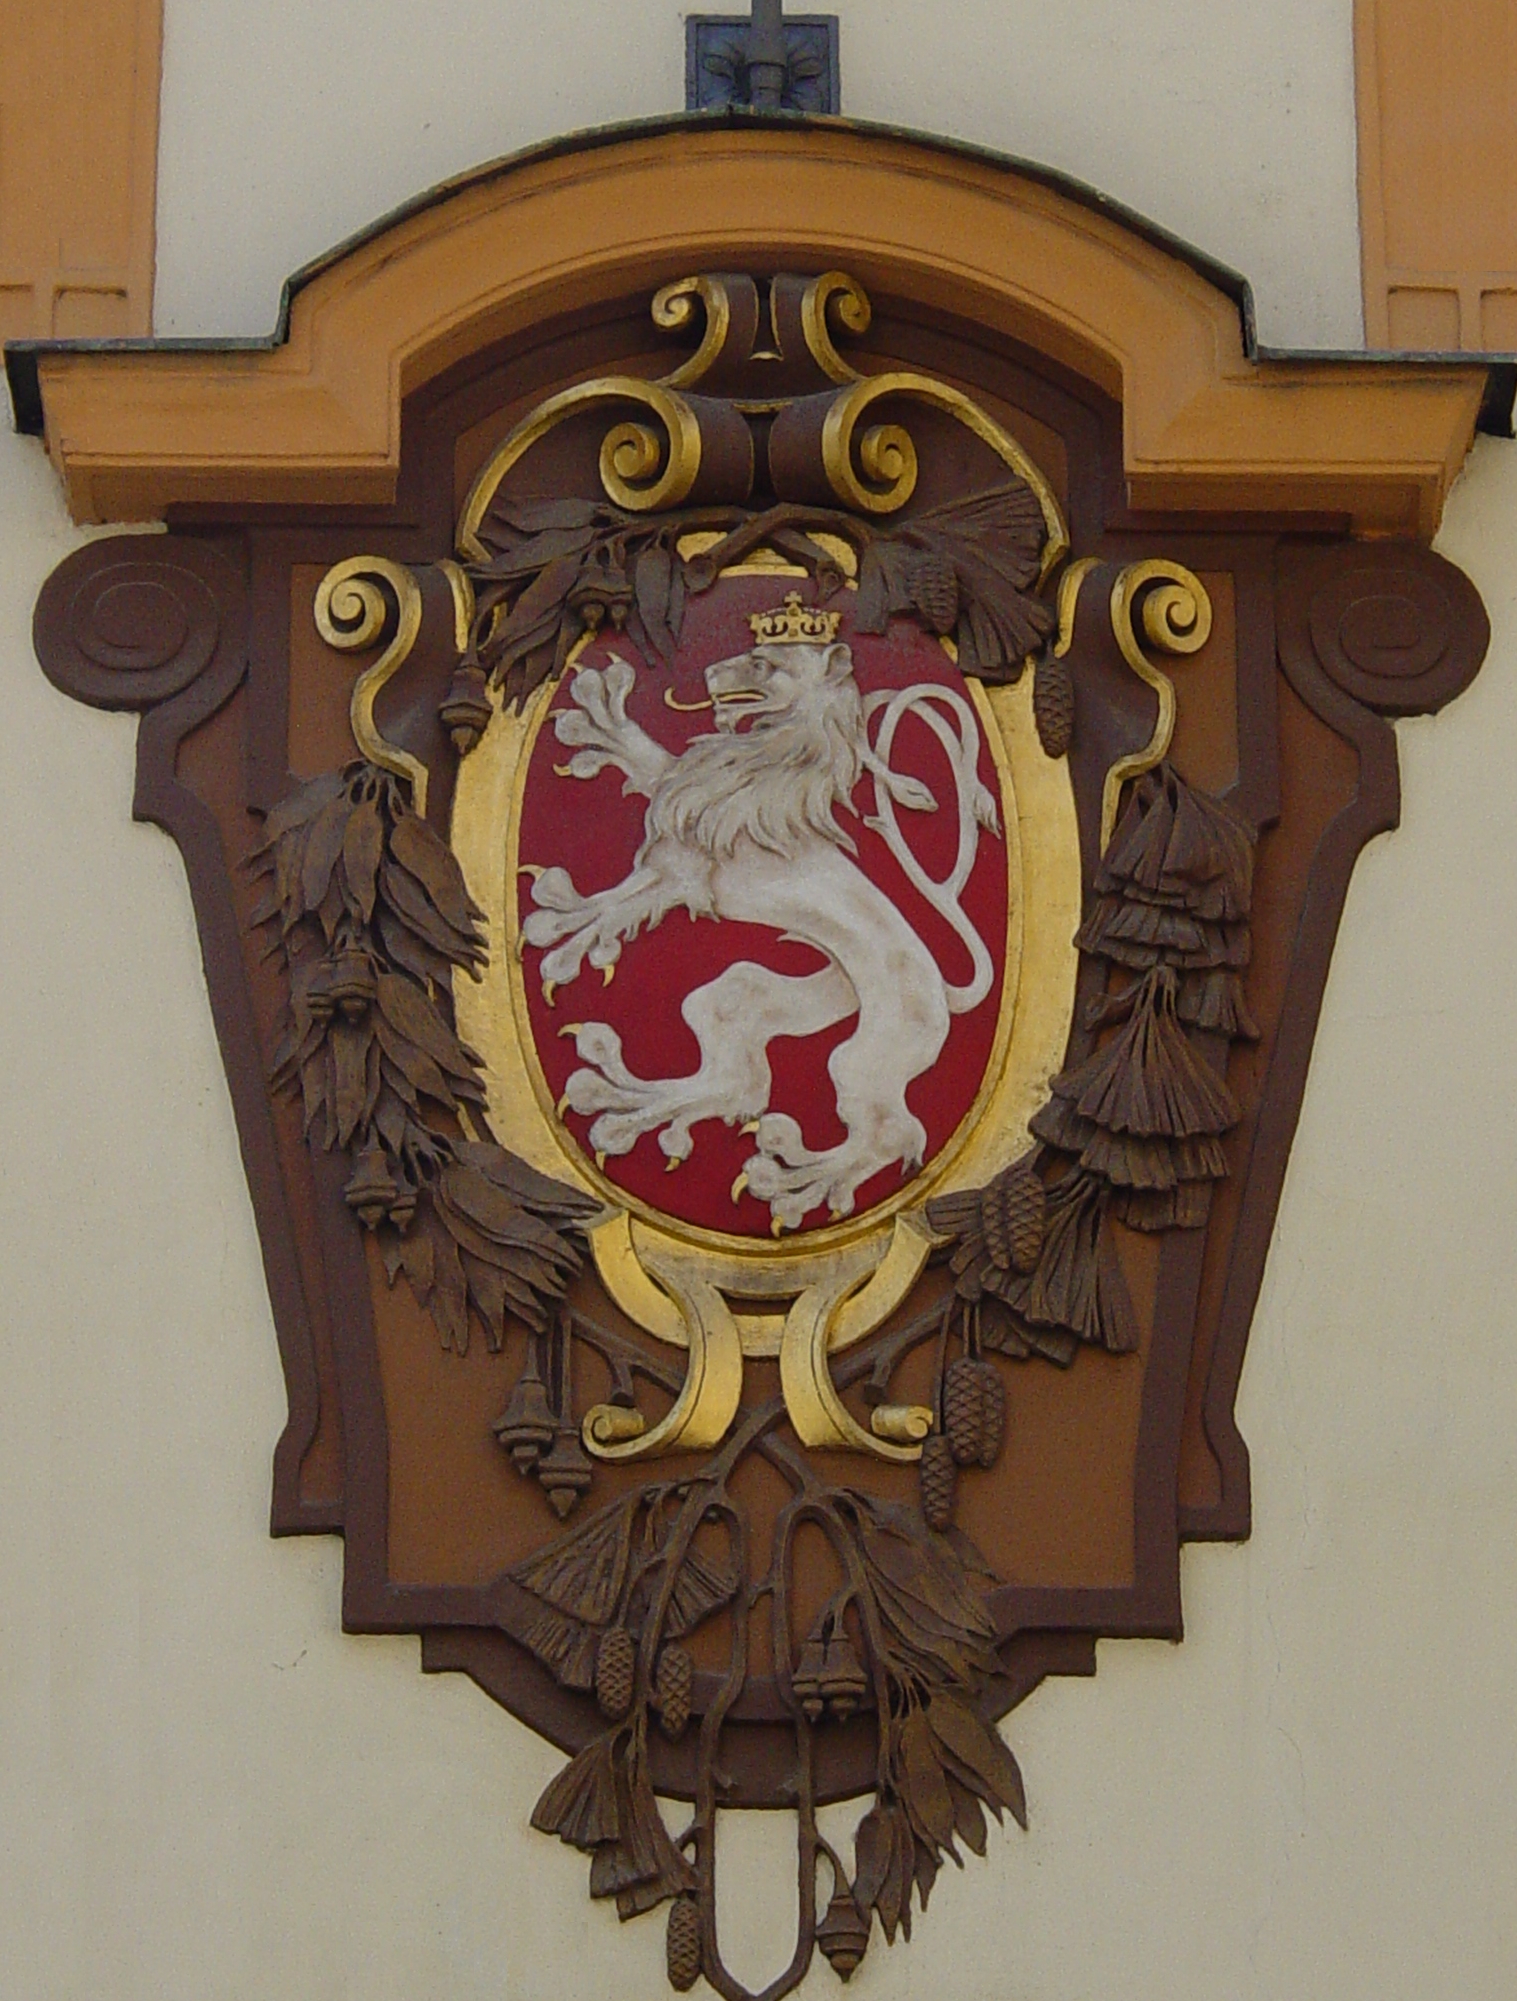 Townhall city coat of arms